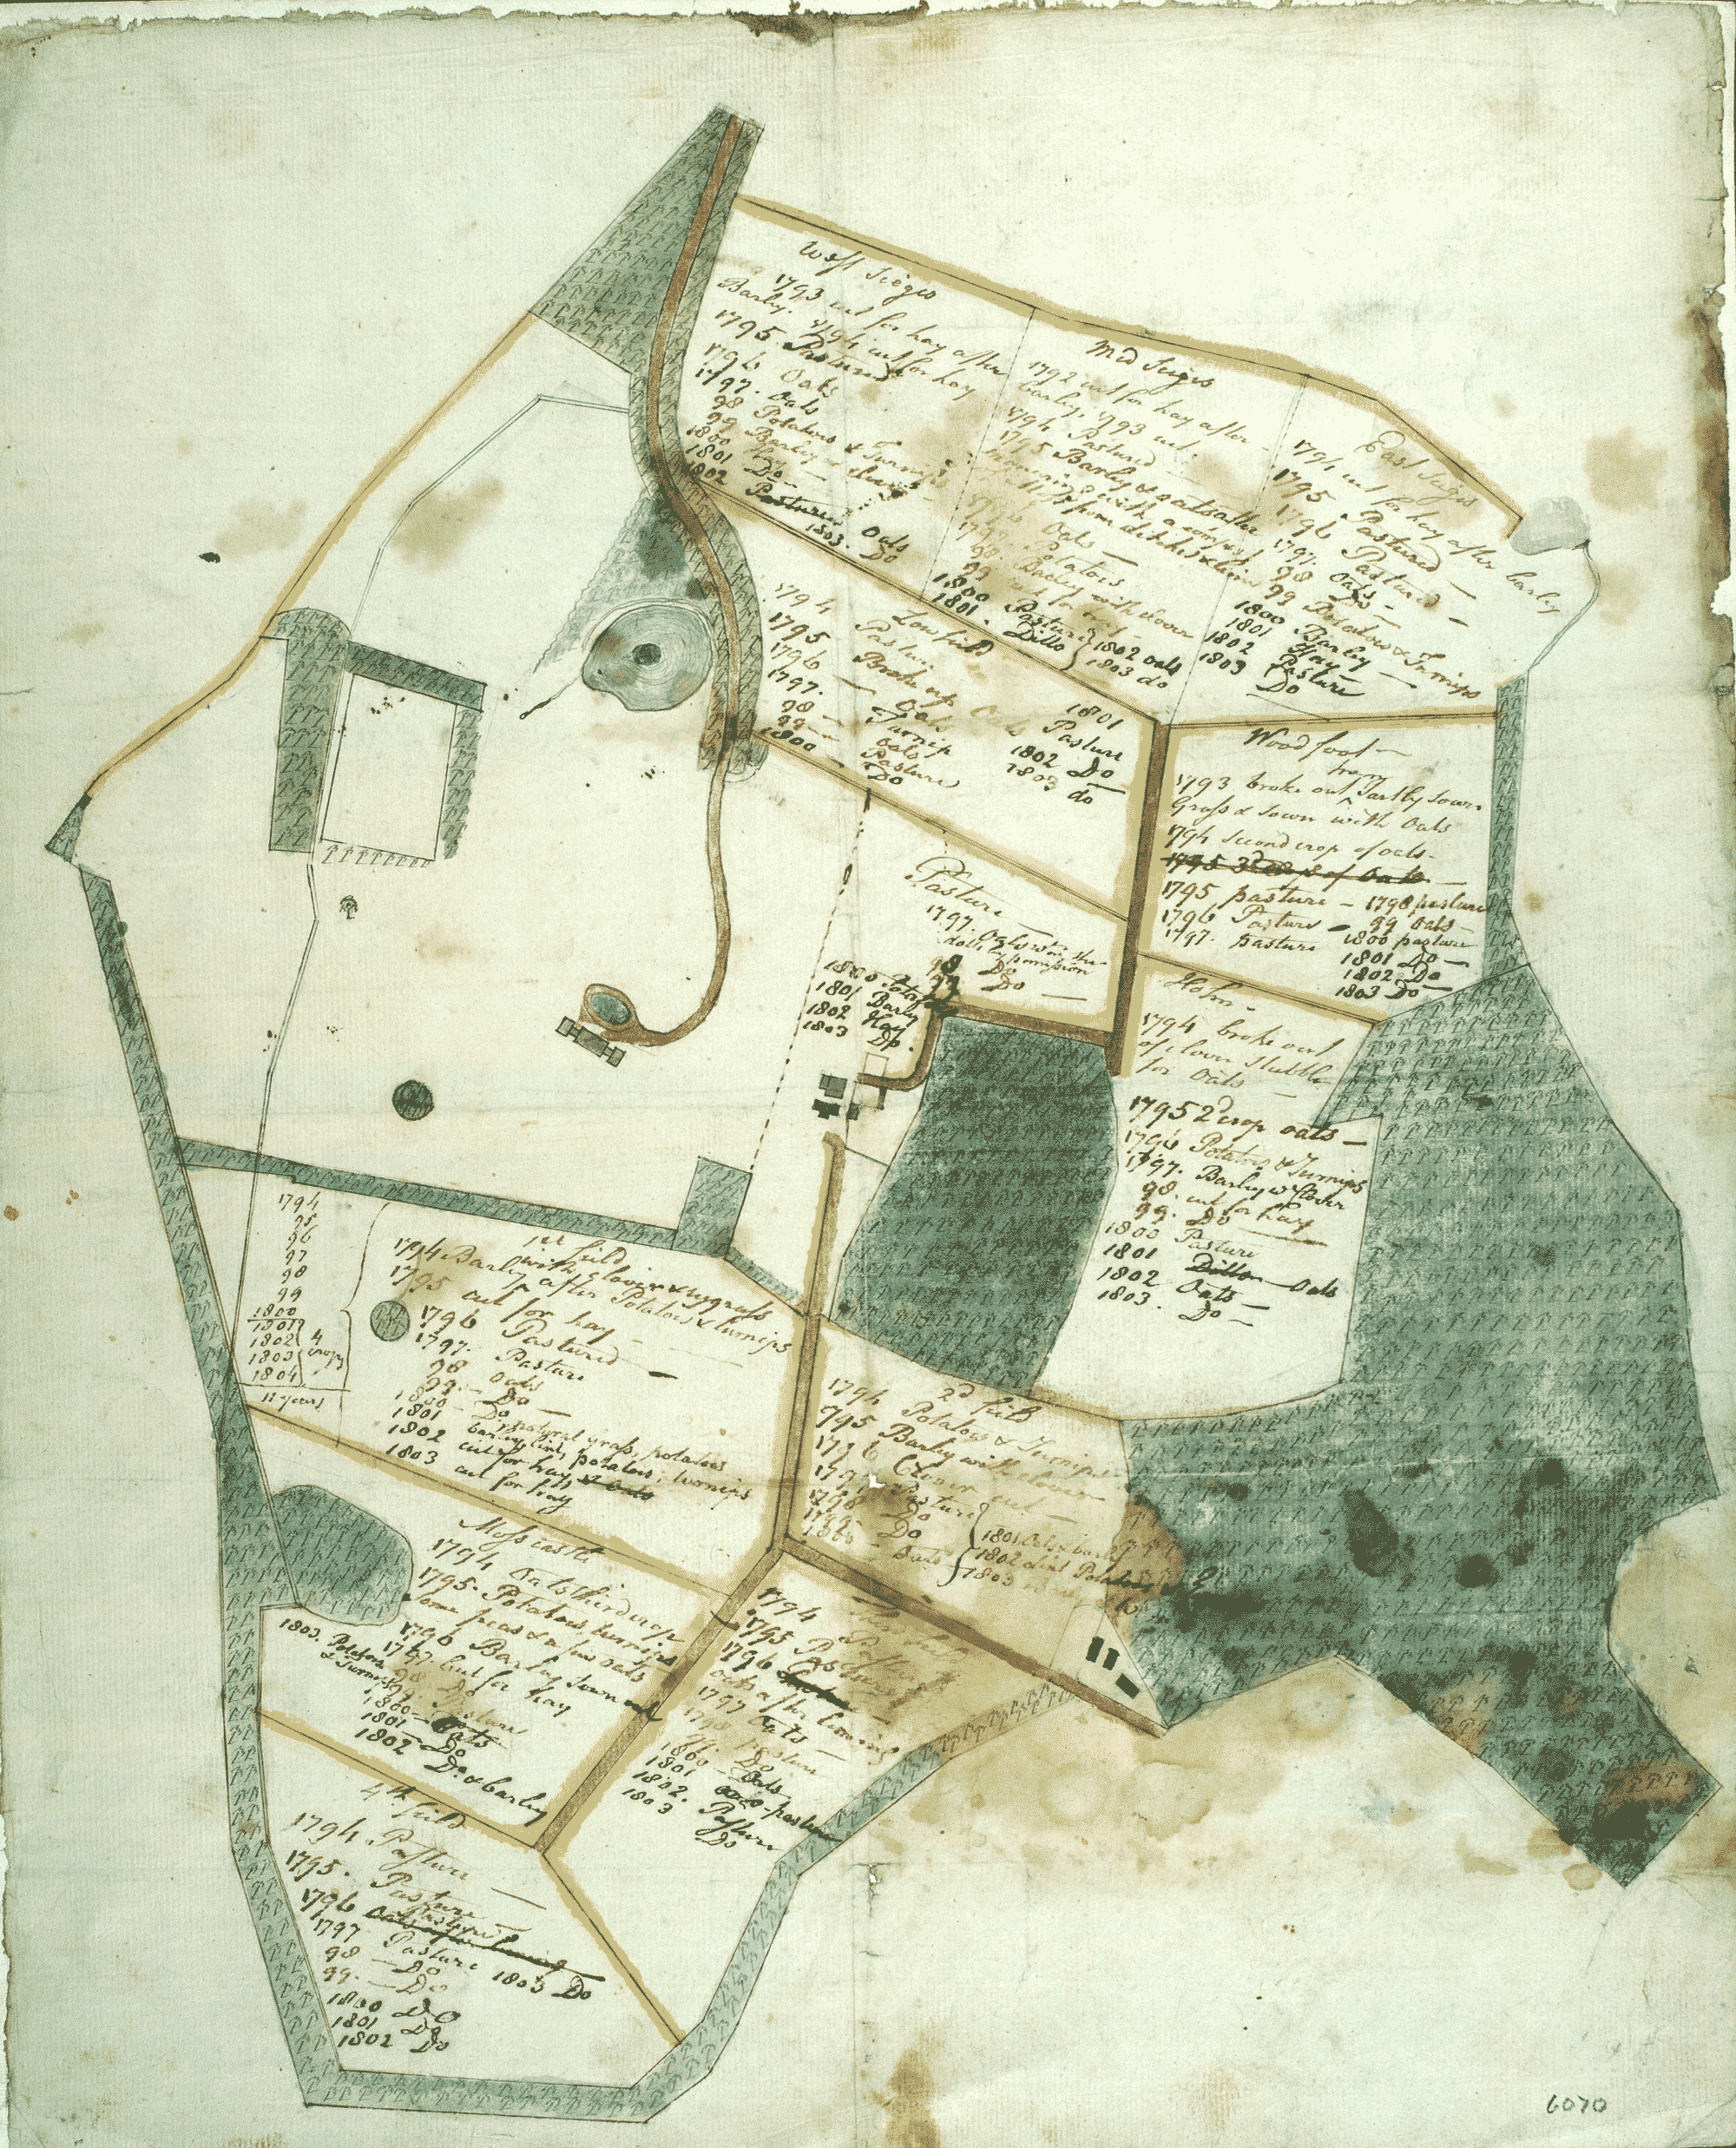 Image shows a plan of crop rotation implemented at Murraythwaite in Dumfriesshire. National Records of Scotland reference RHP 6070